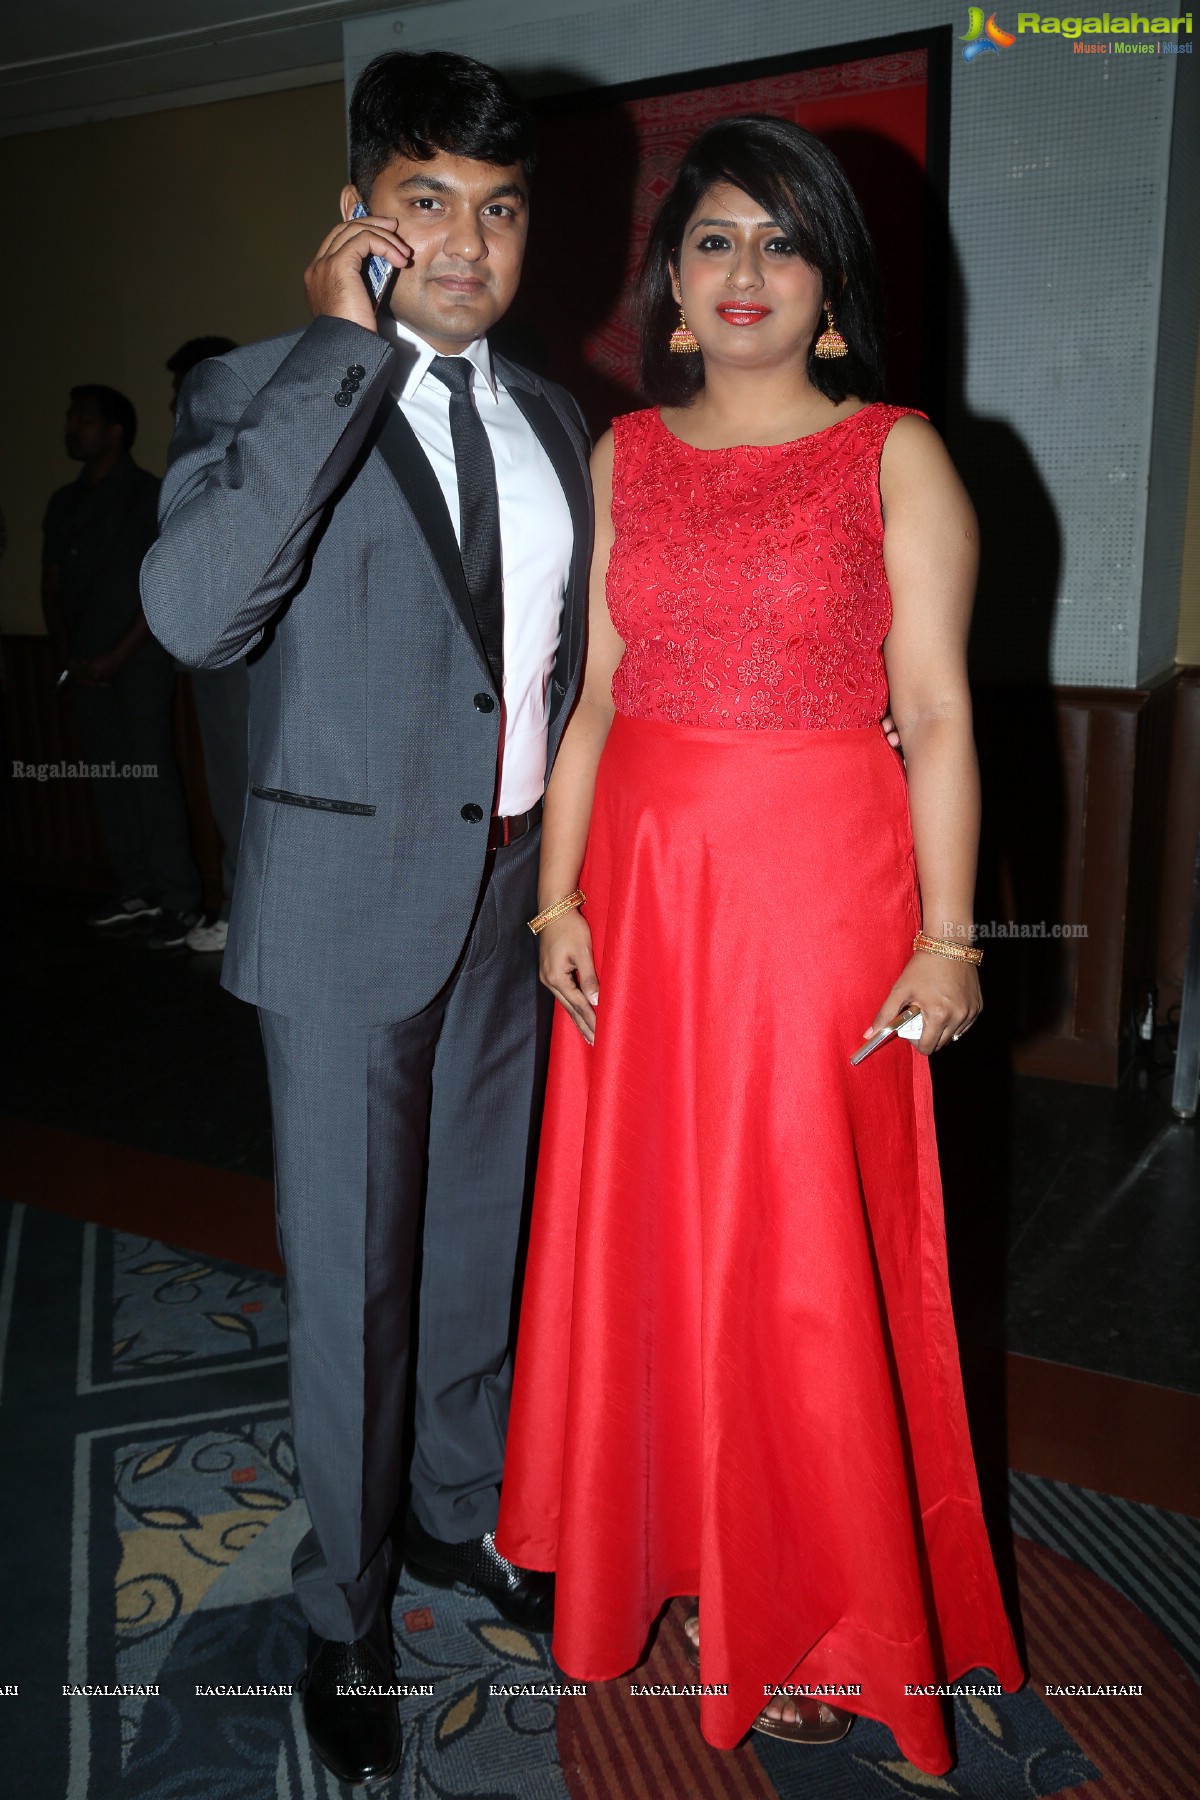 Celebrations by Aadarsh Balakrishna and Gulnar Virk at Hyderabad Marriott Hotel and Convention Centre